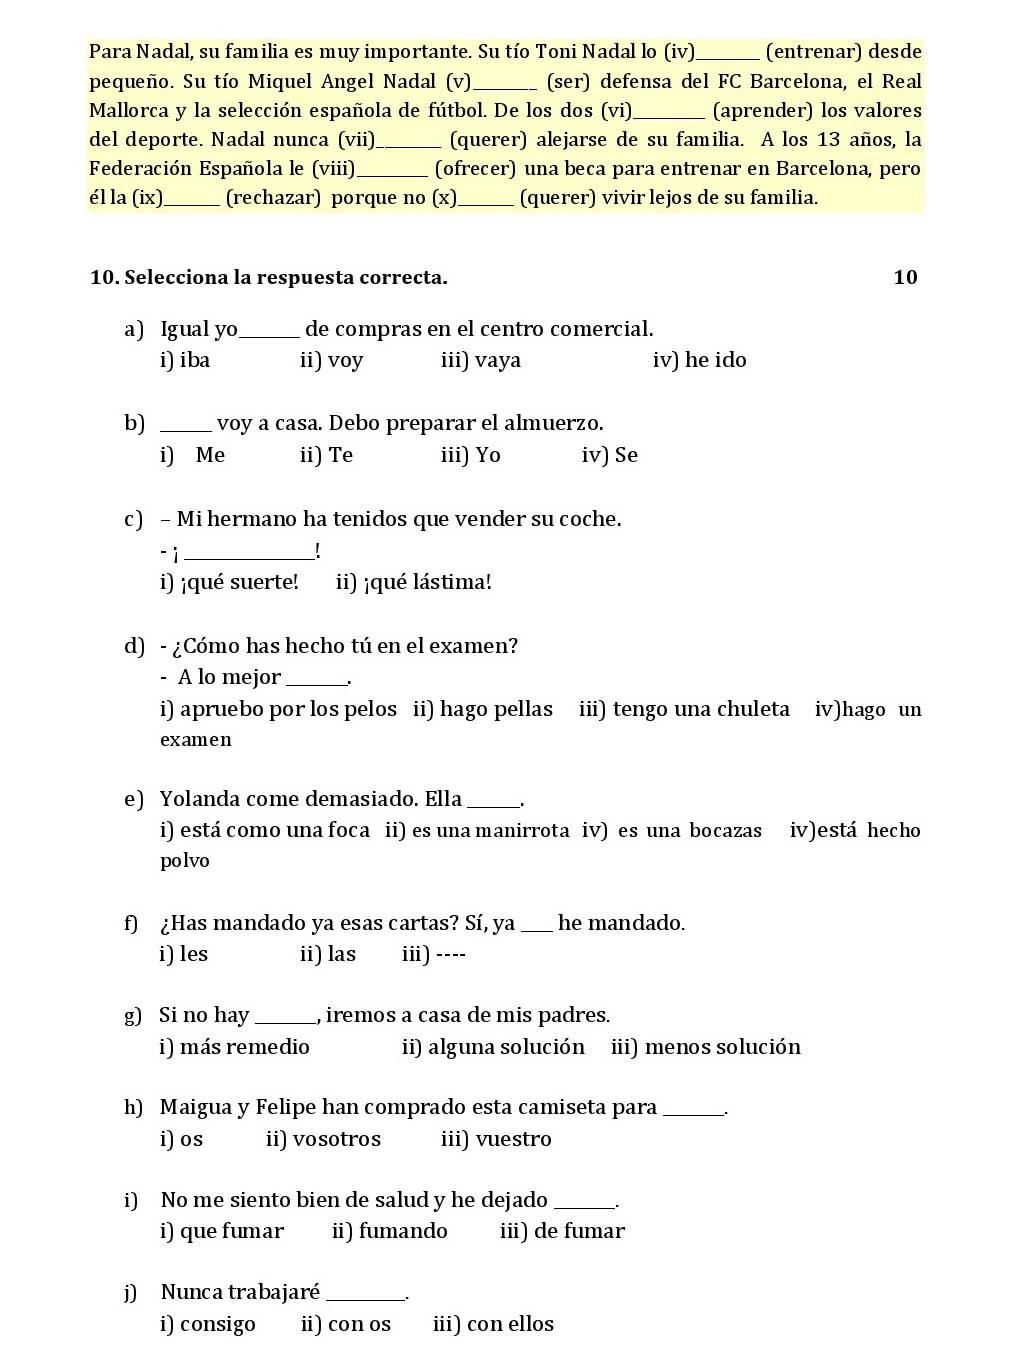 Spanish CBSE Class X Sample Question Paper 2018-19 - Image 4